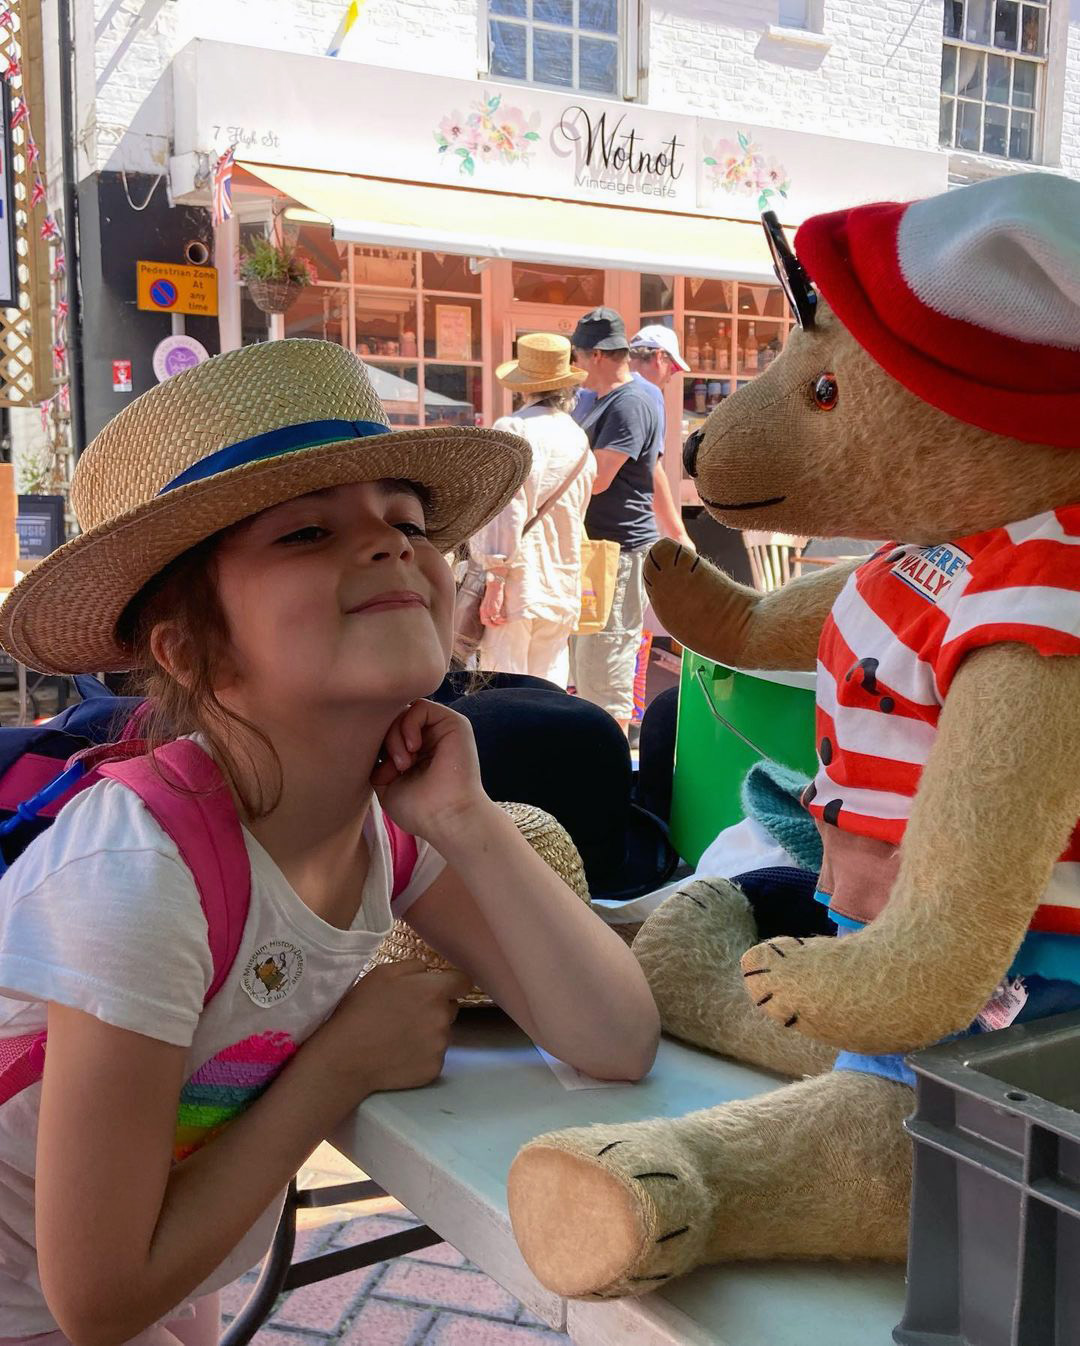 A young girl with a straw hat looks up at Winifred the bear mascot